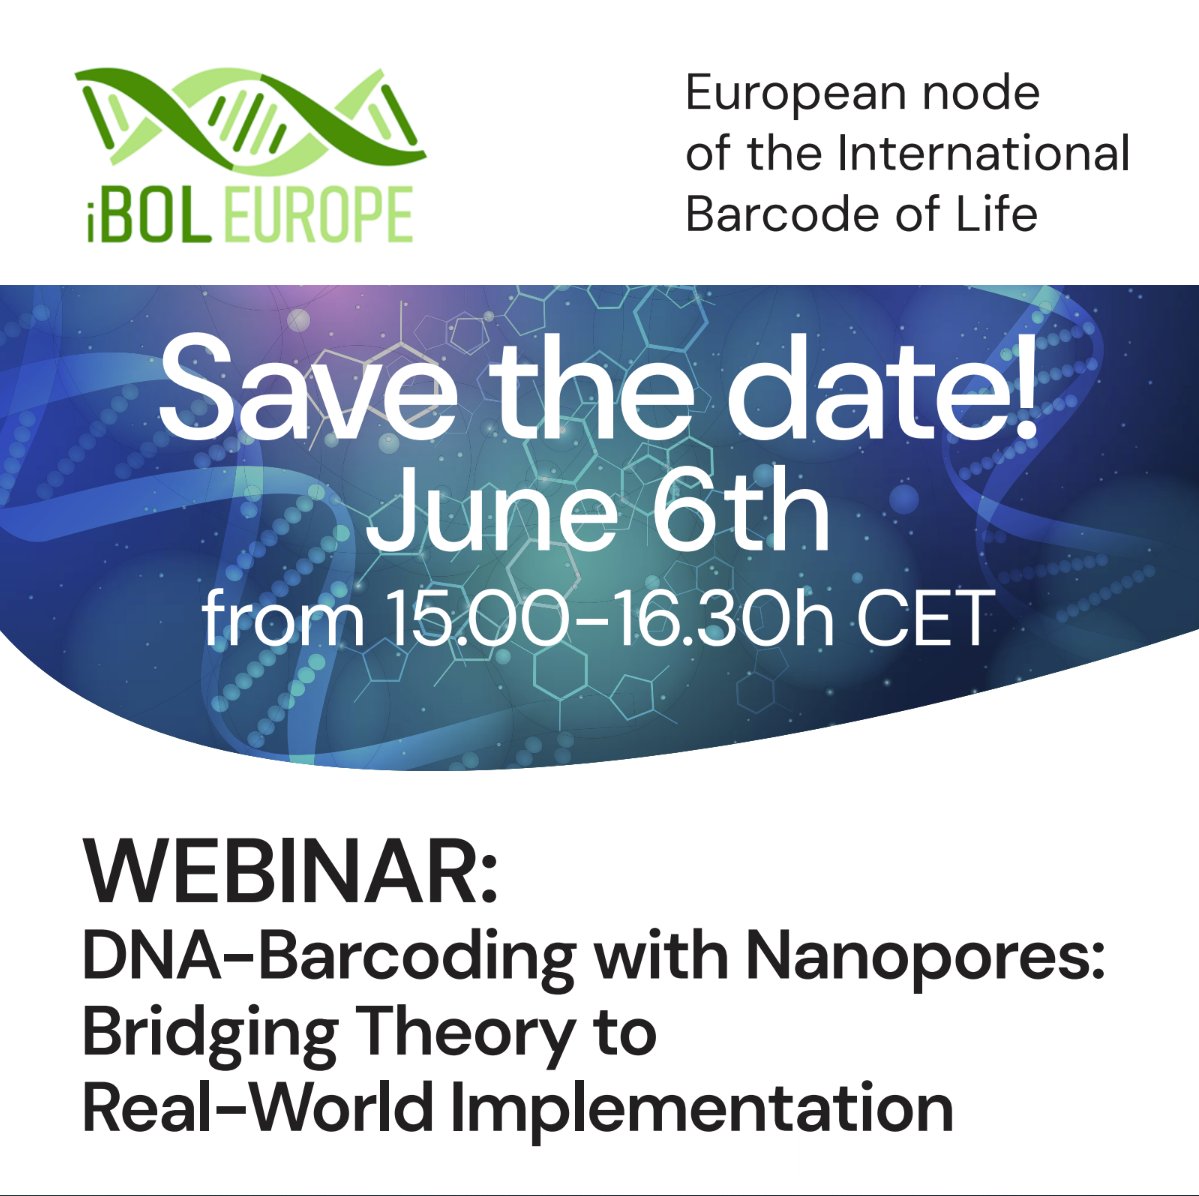 🚨Join us on June 6th from 15.00-16.30h CET for a webinar on #DNAbarcoding with #nanopores: Bridging theory to real-world implementation. Experts will provide tips & tricks on how to efficiently use ONT for DNA-barcoding applications.

See more info: iboleurope.org/june-6th-webin…